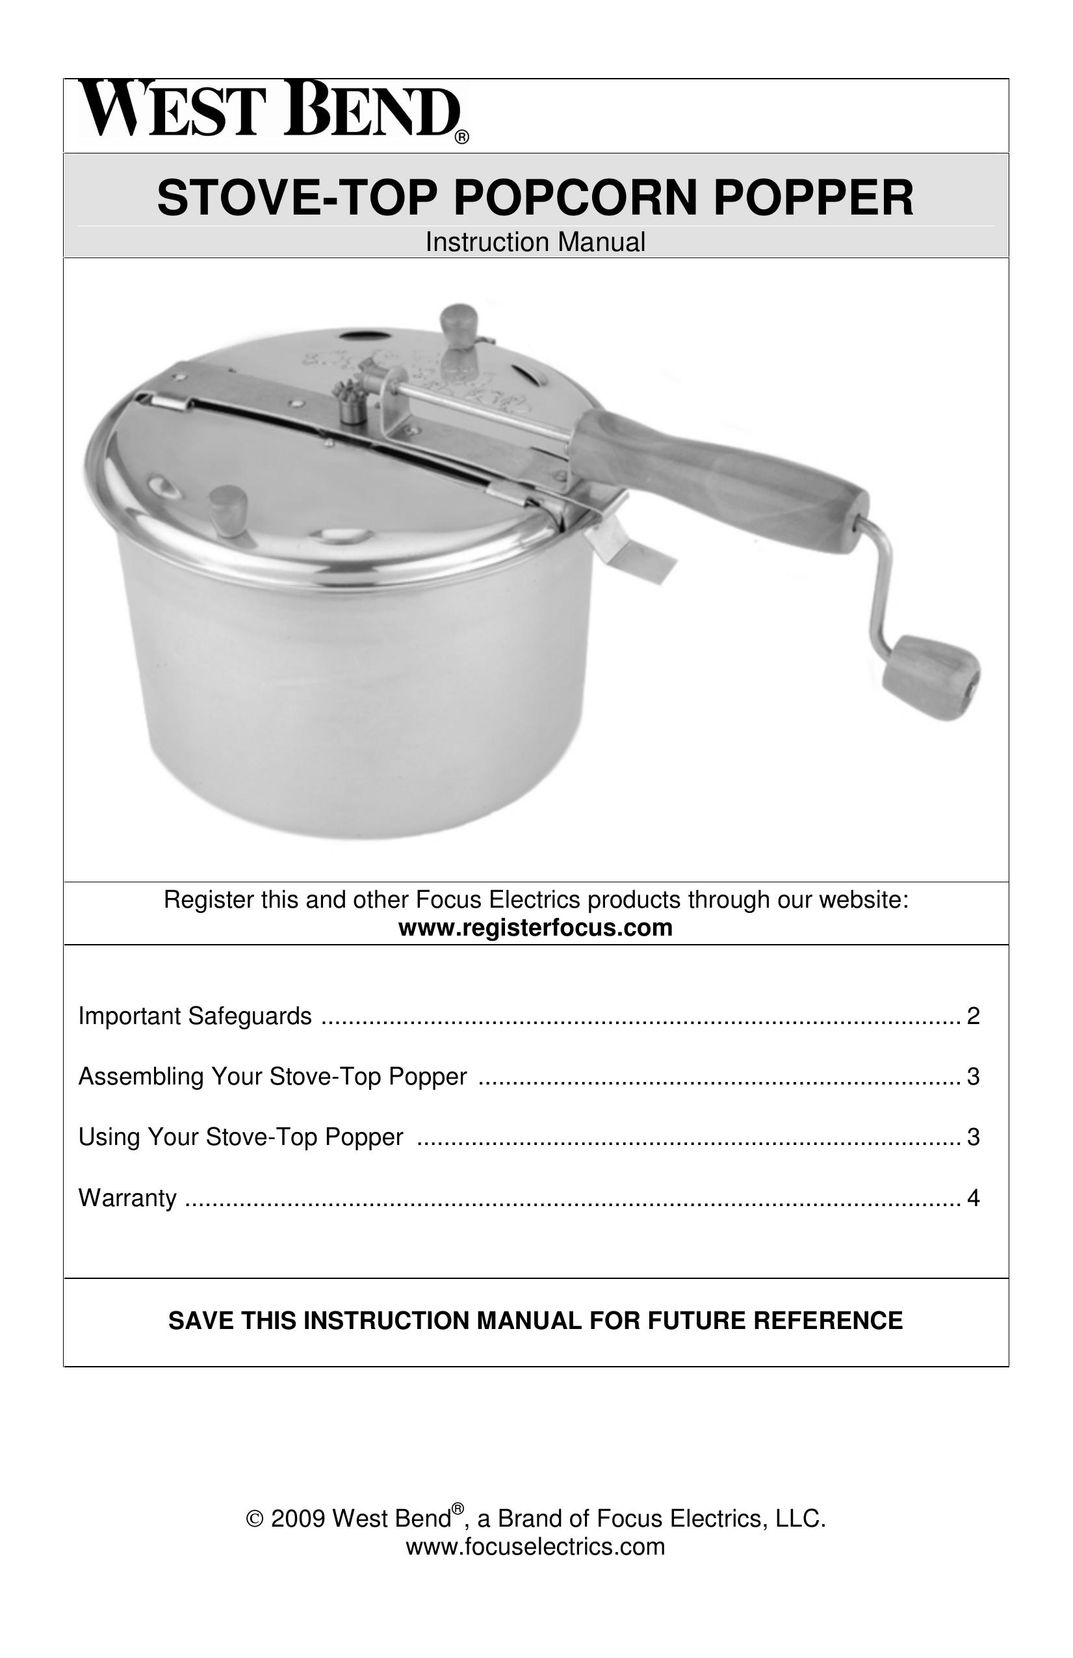 West Bend PC10651 Popcorn Poppers User Manual